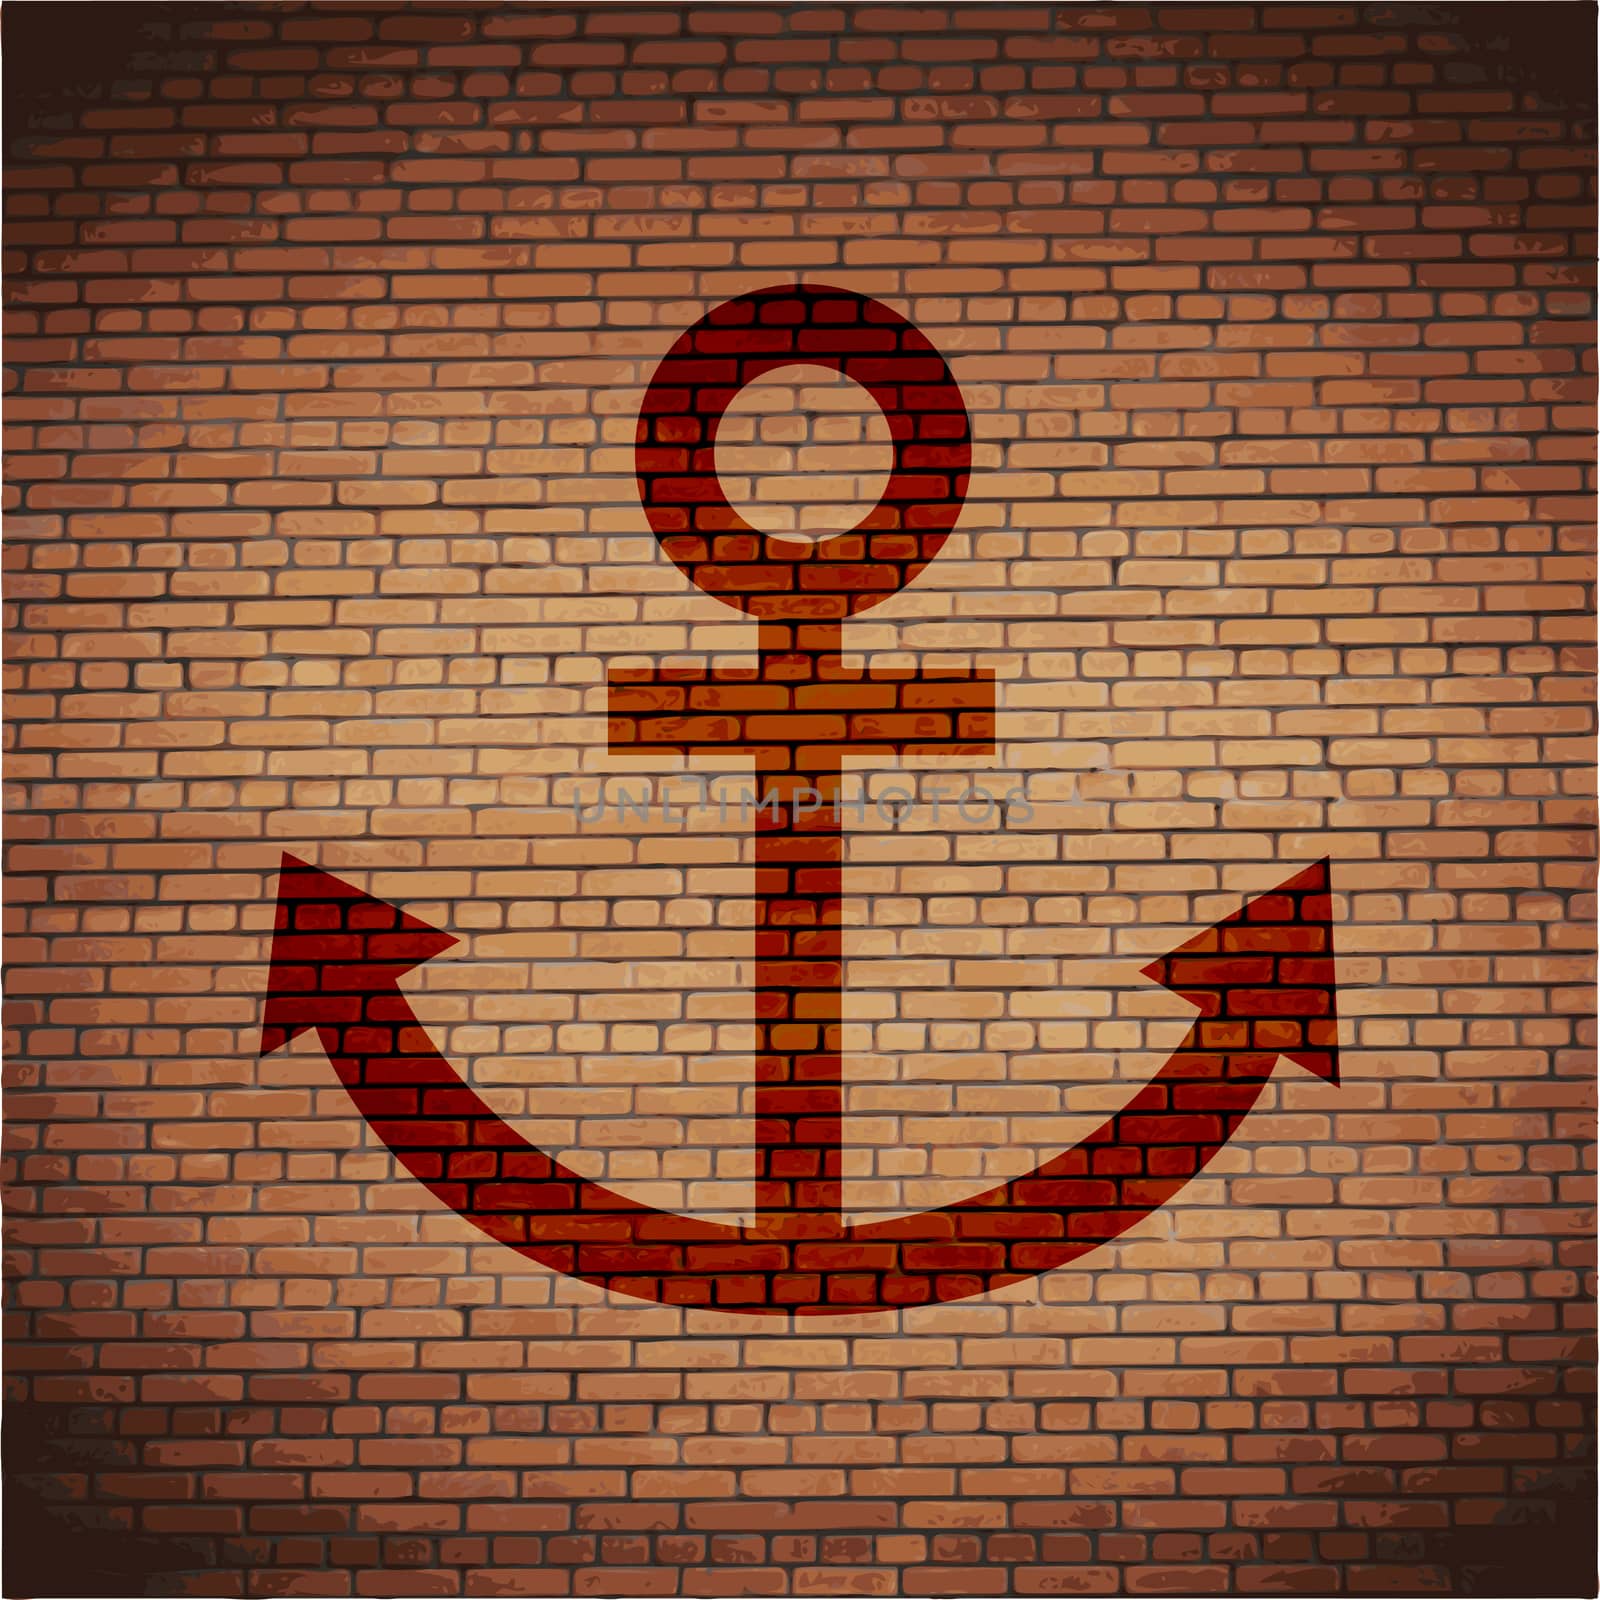 Anchor icon flat design with abstract background.